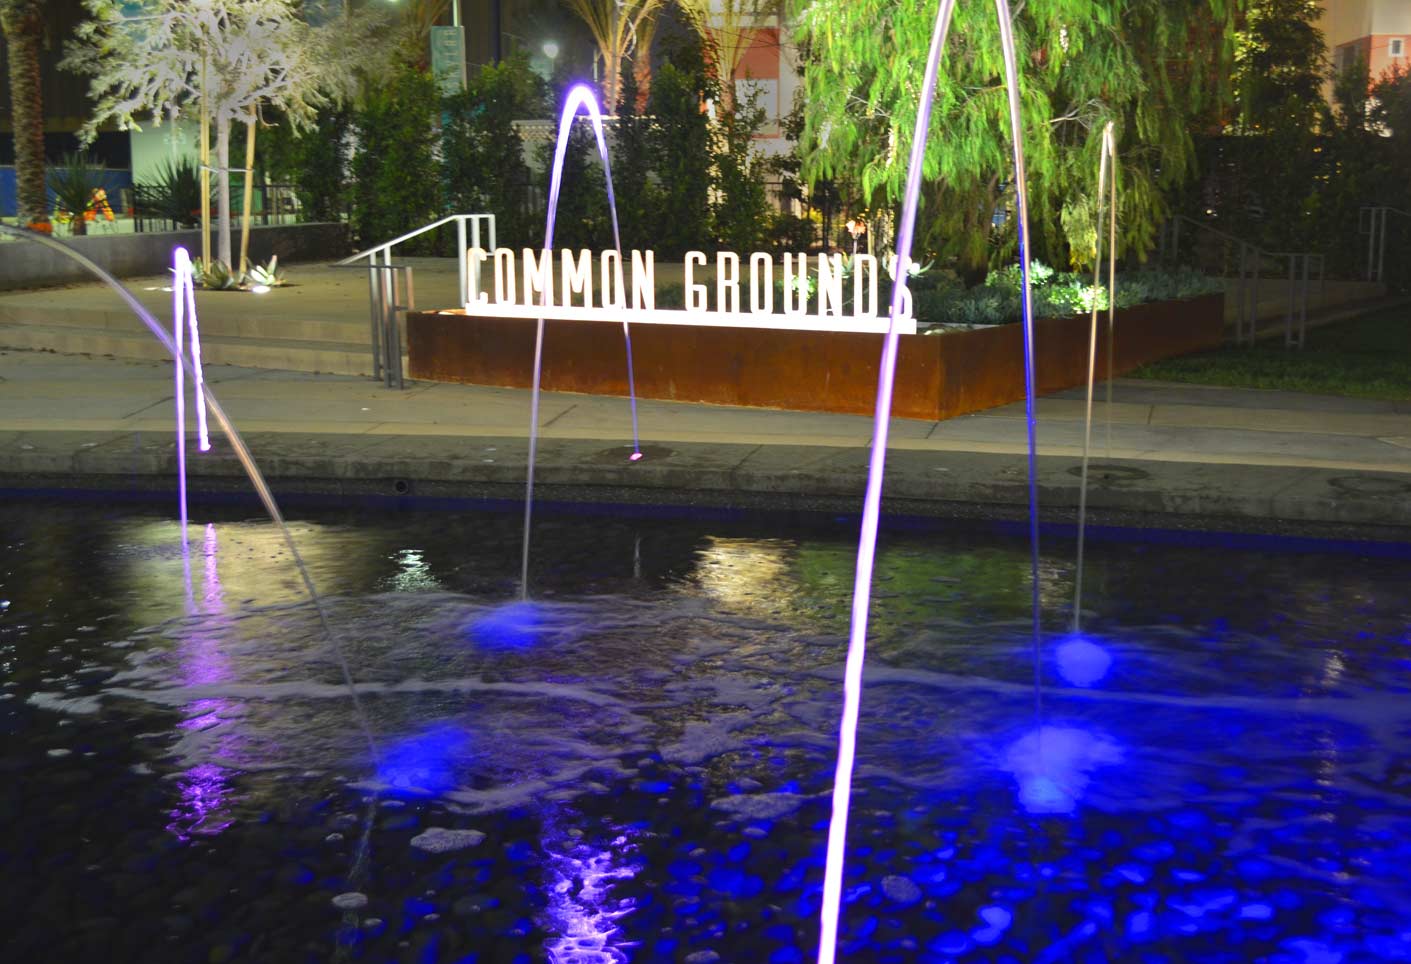 Community Development Water Feature at night with sign